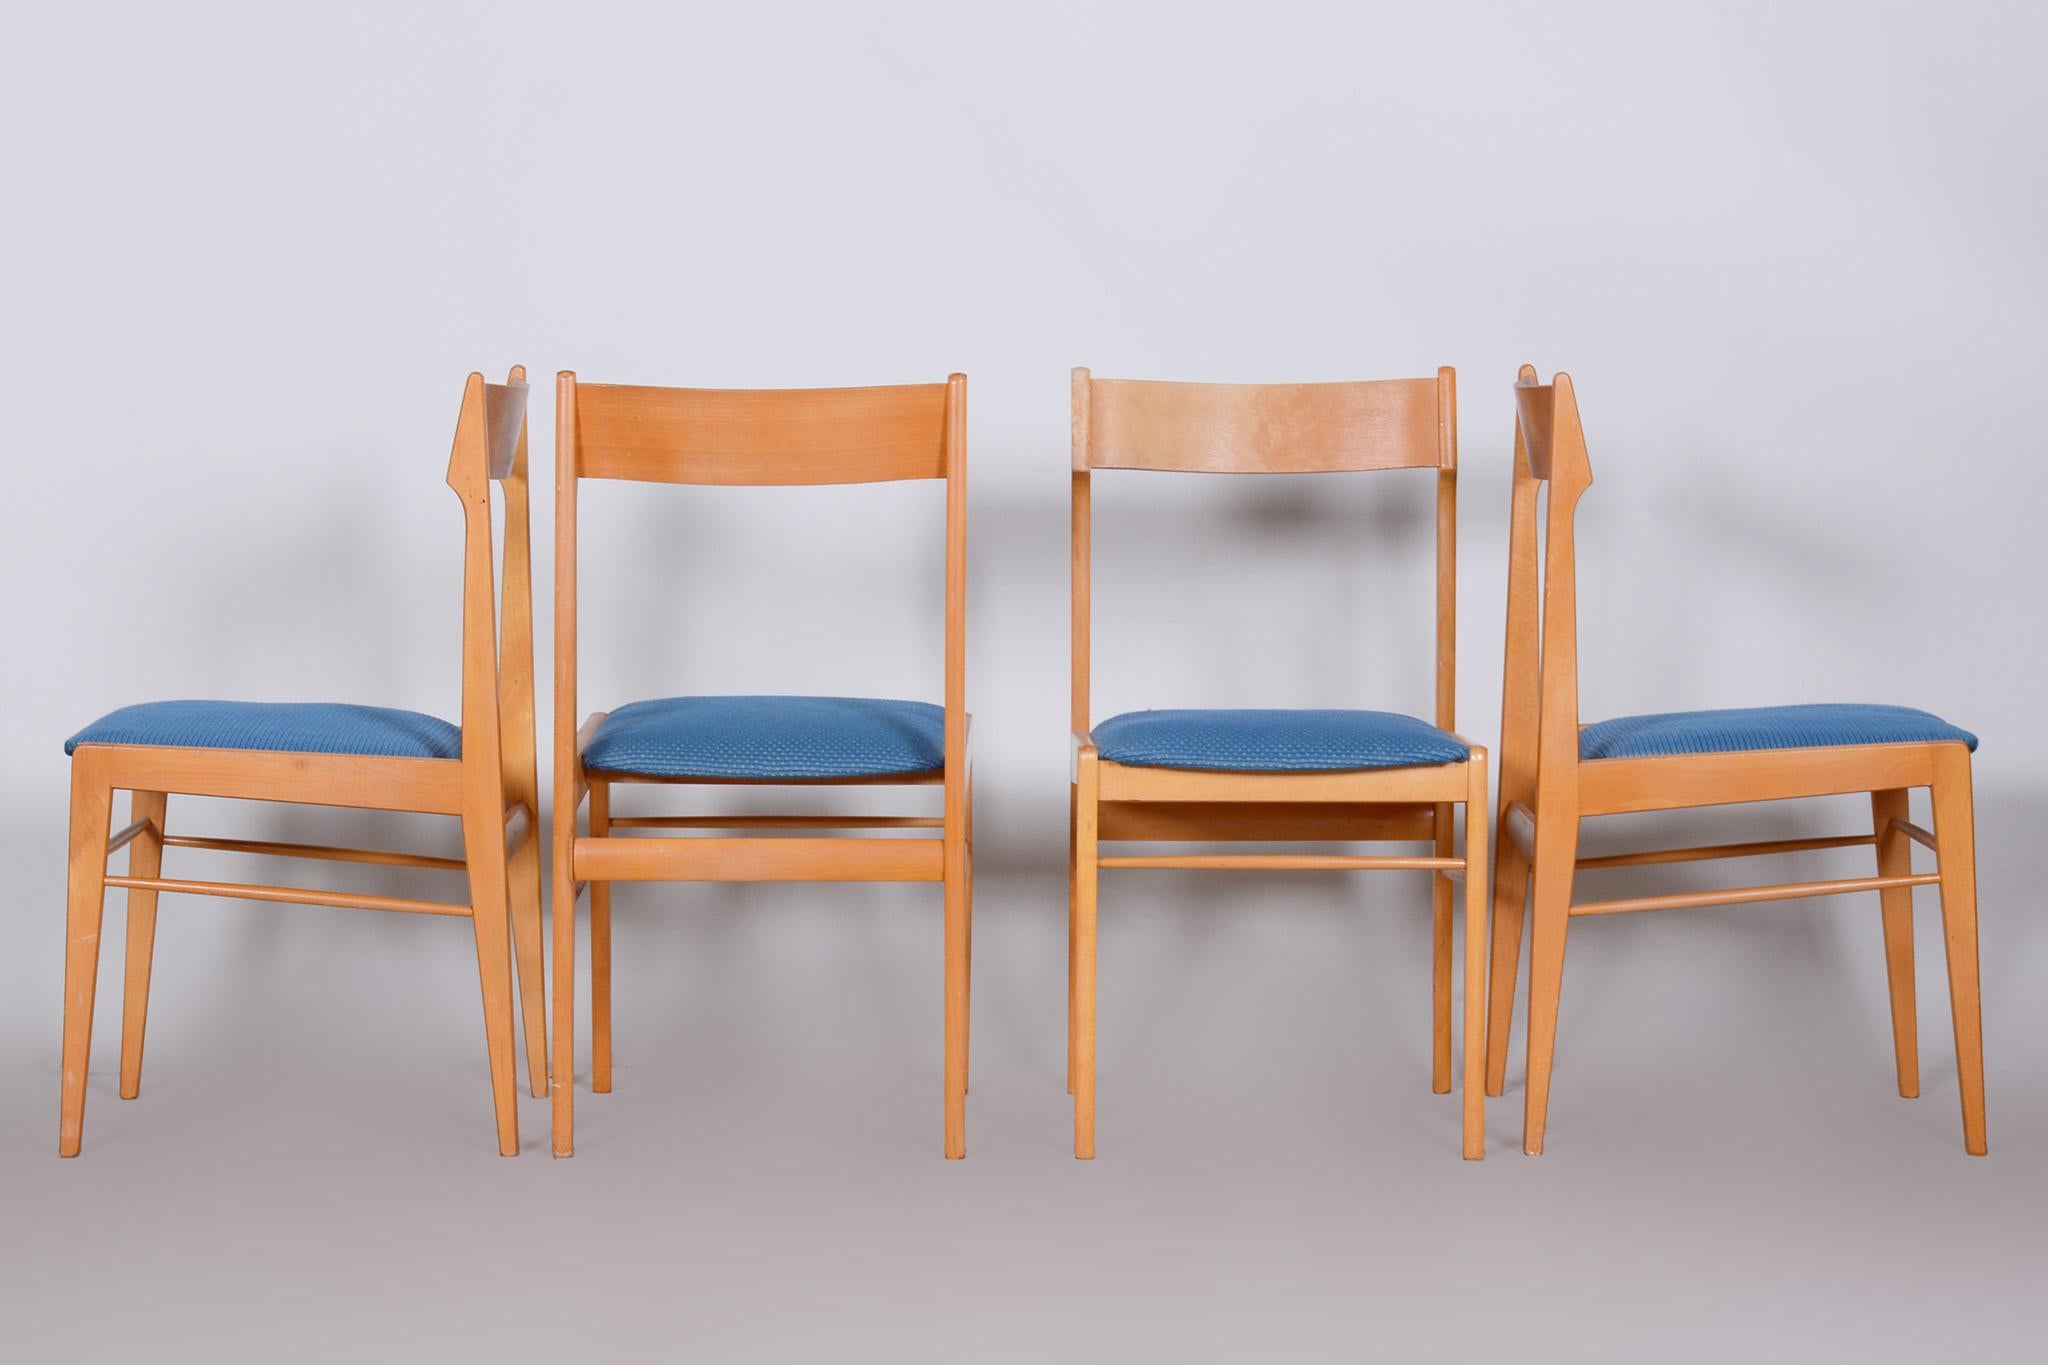 Mid-Century Modern Blue and Brown Dining Chairs 4 Pcs, Well Preserved Original Condition, 1950s For Sale